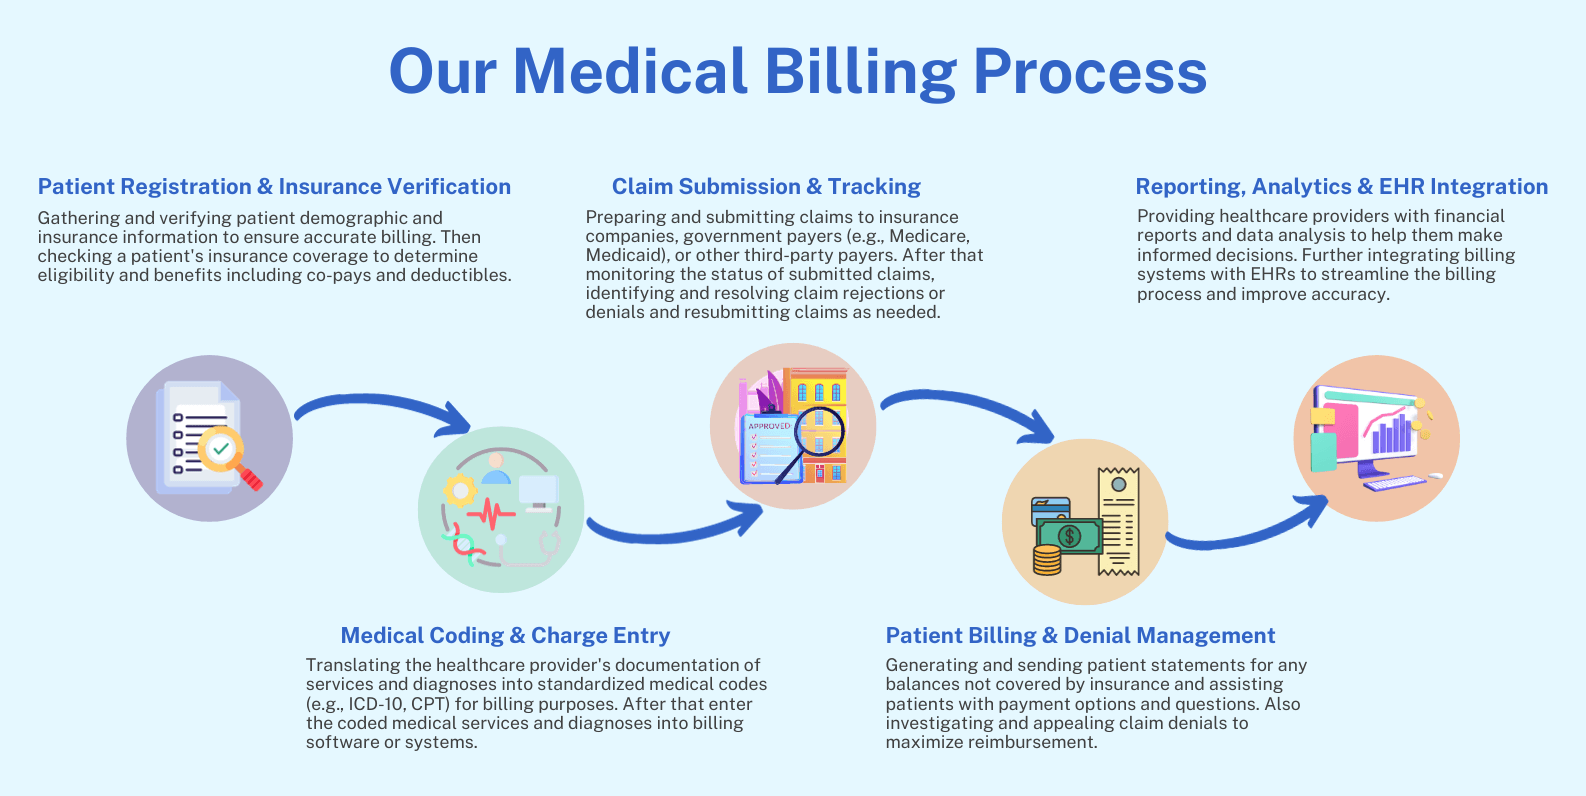 Our Medical Billing Process